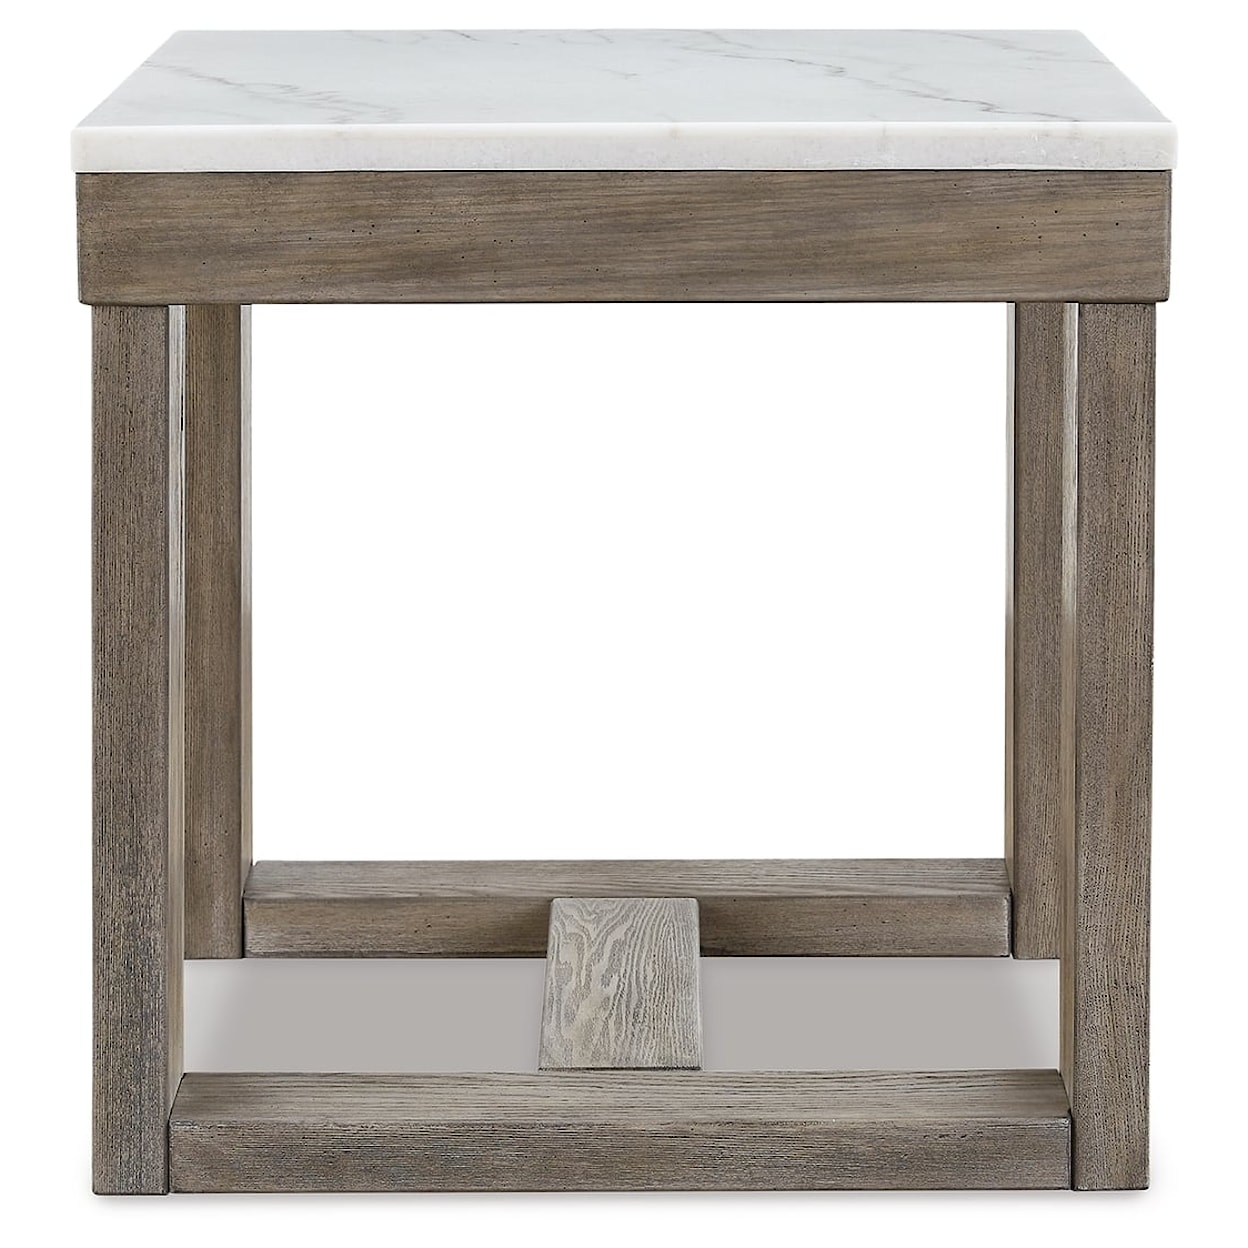 Signature Design by Ashley Loyaska Square End Table